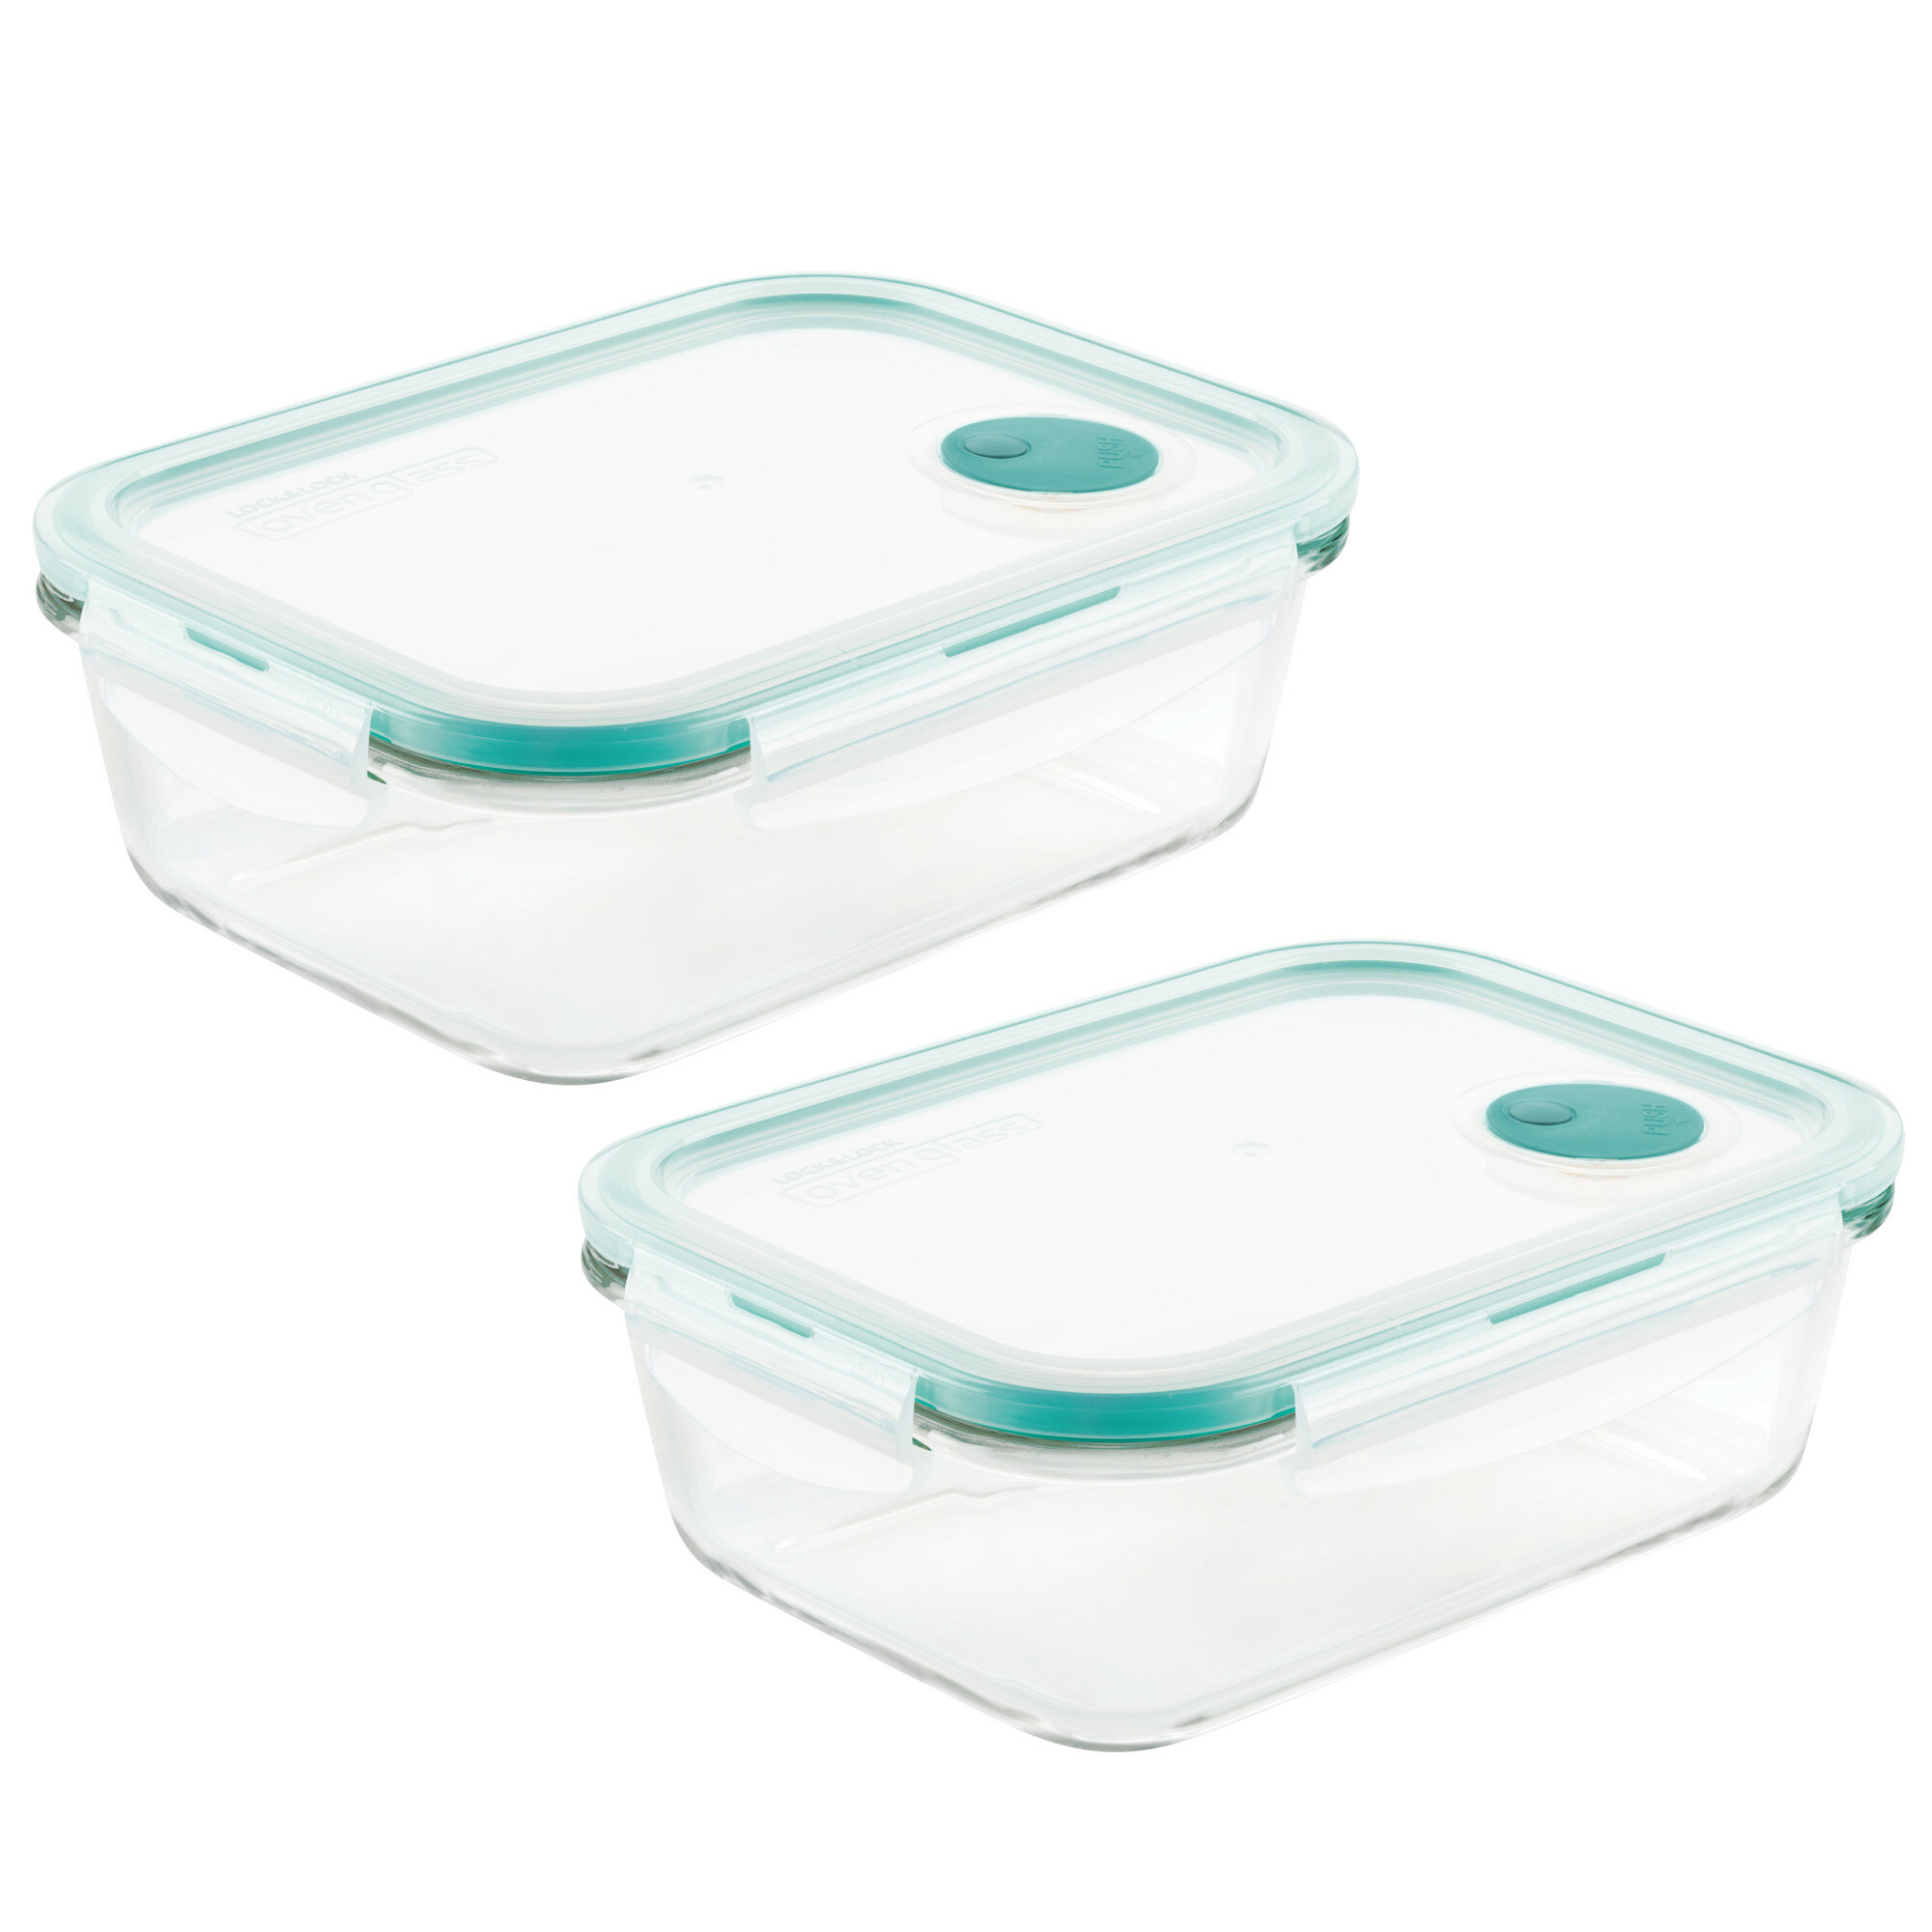 Nestable Divided Glass Meal Prep Containers 2 Compartment